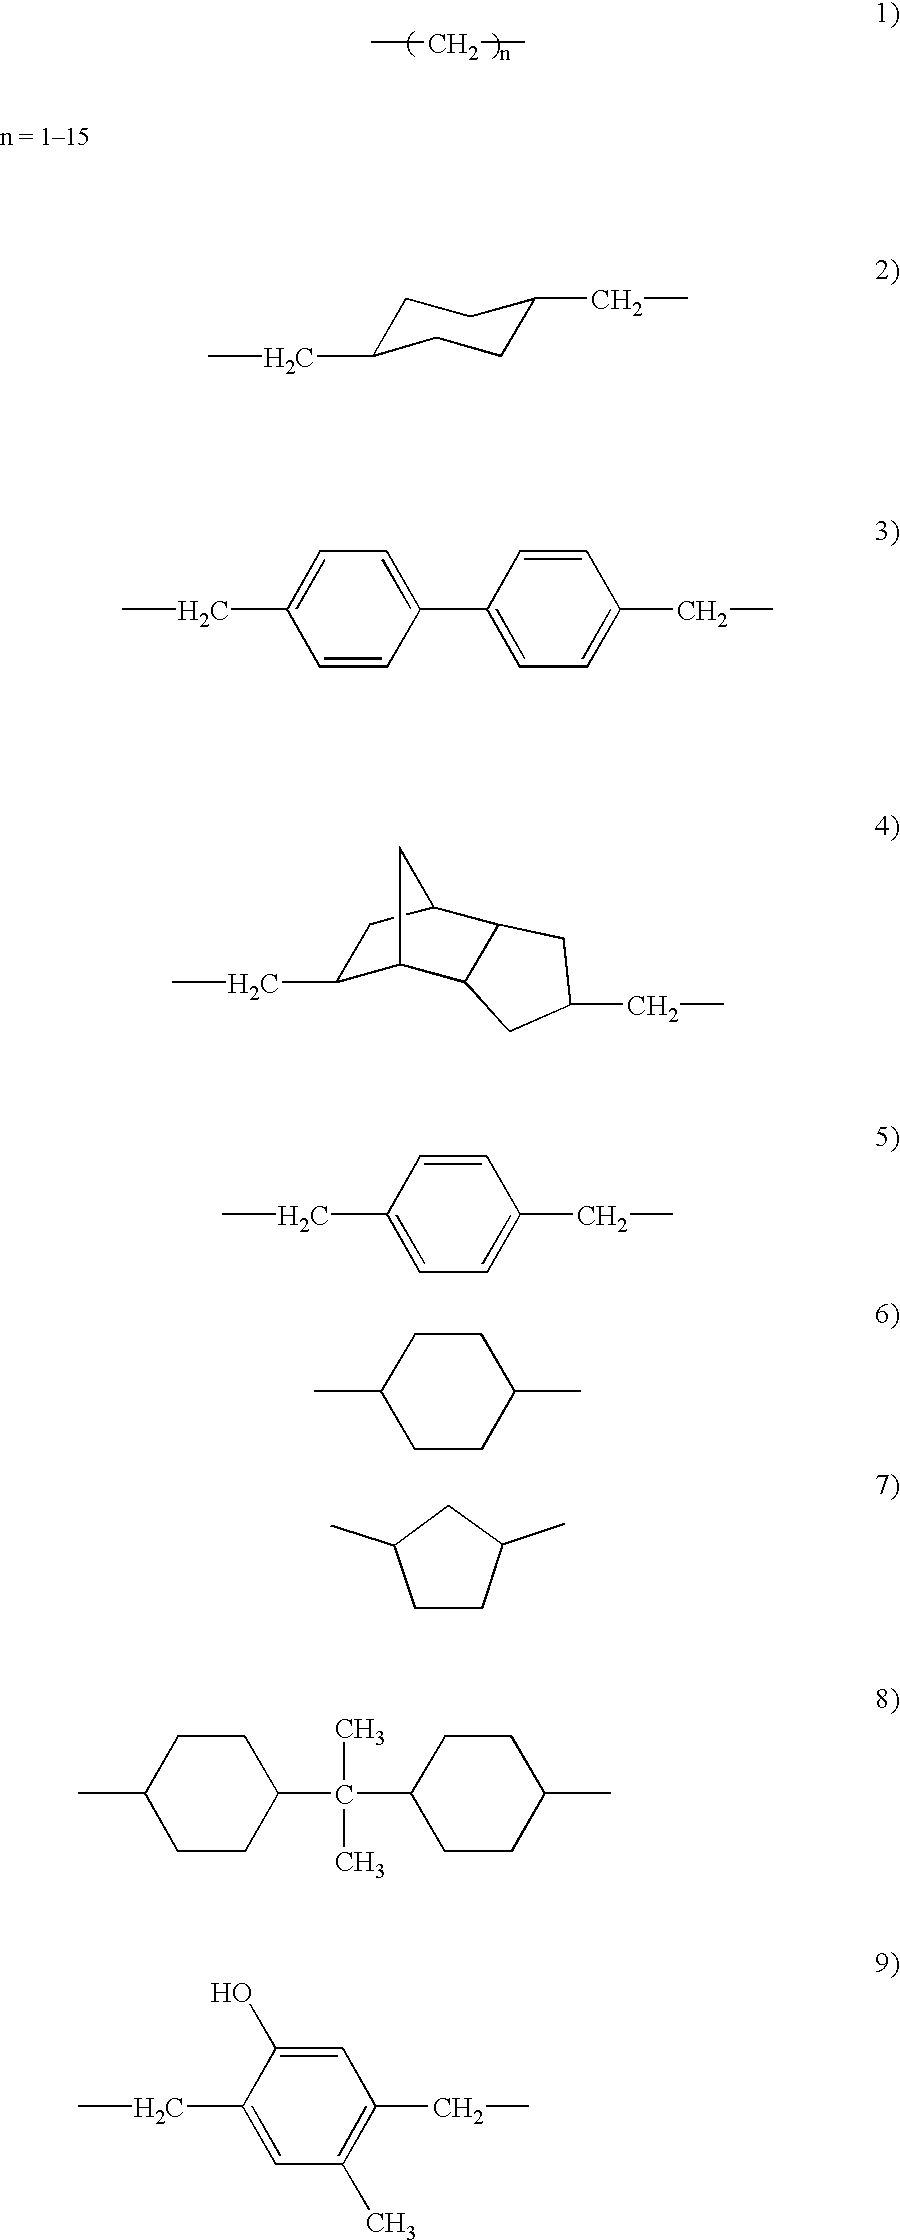 Reworkable b-stageable adhesive and use in waferlevel underfill